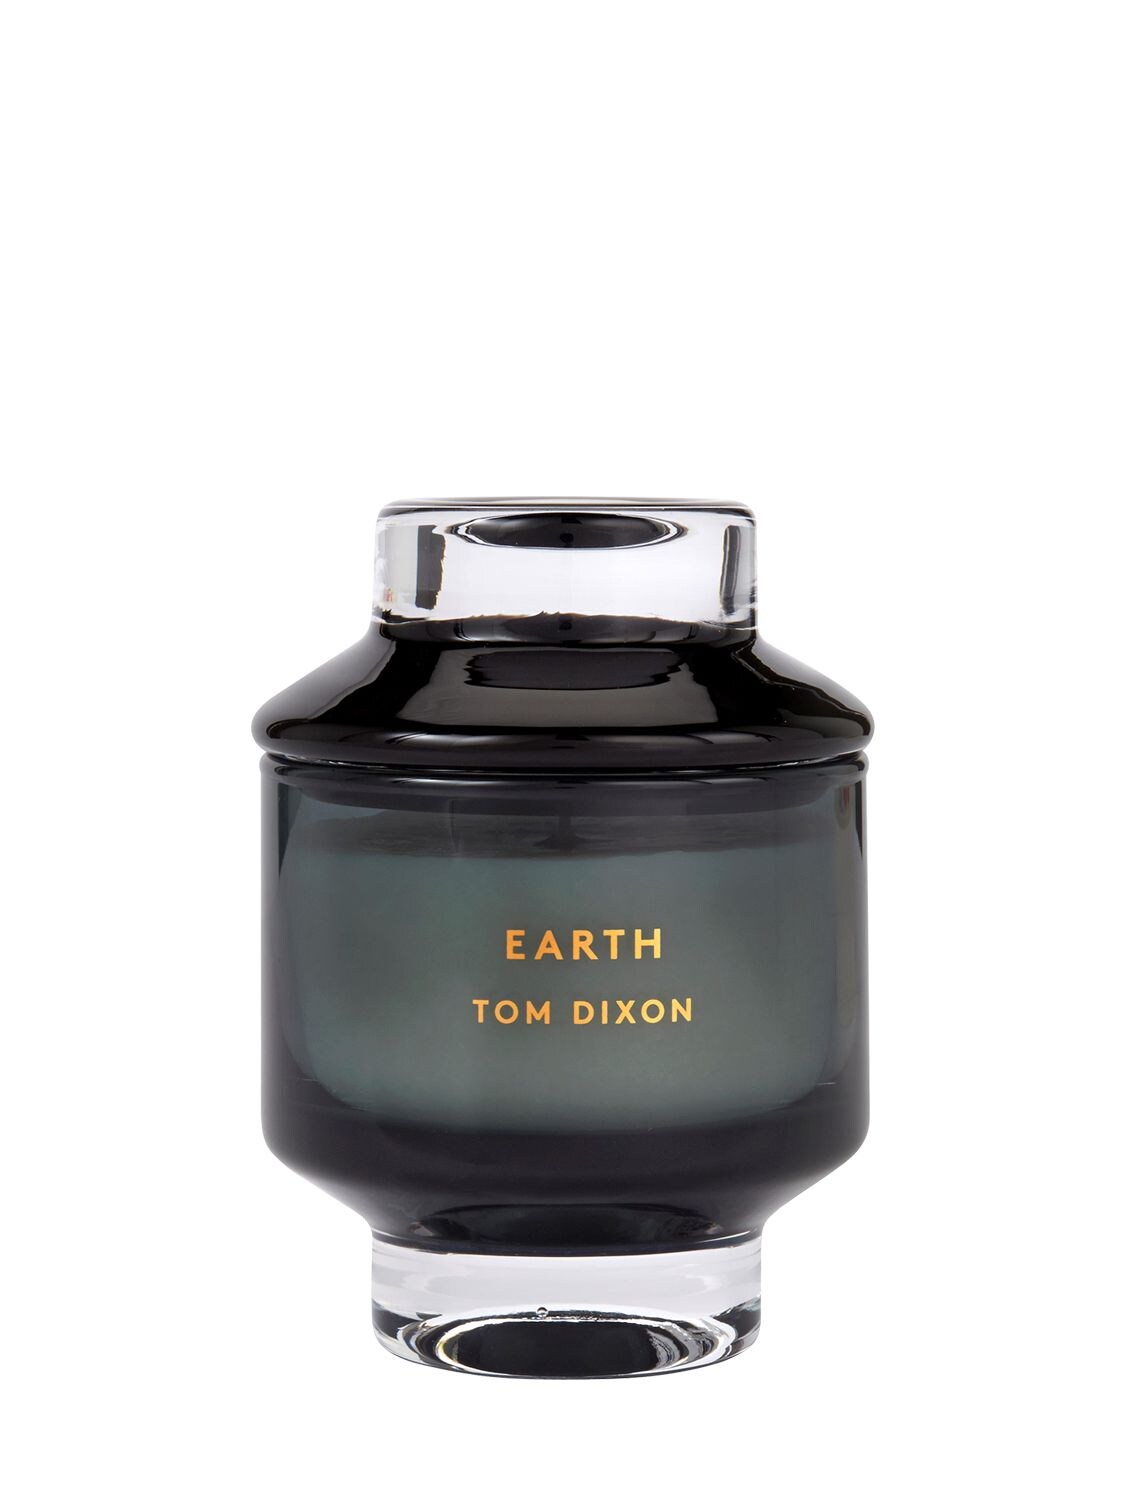 TOM DIXON EARTH - SCENTED CANDLE,65IVVB002-QKXBQ0S1